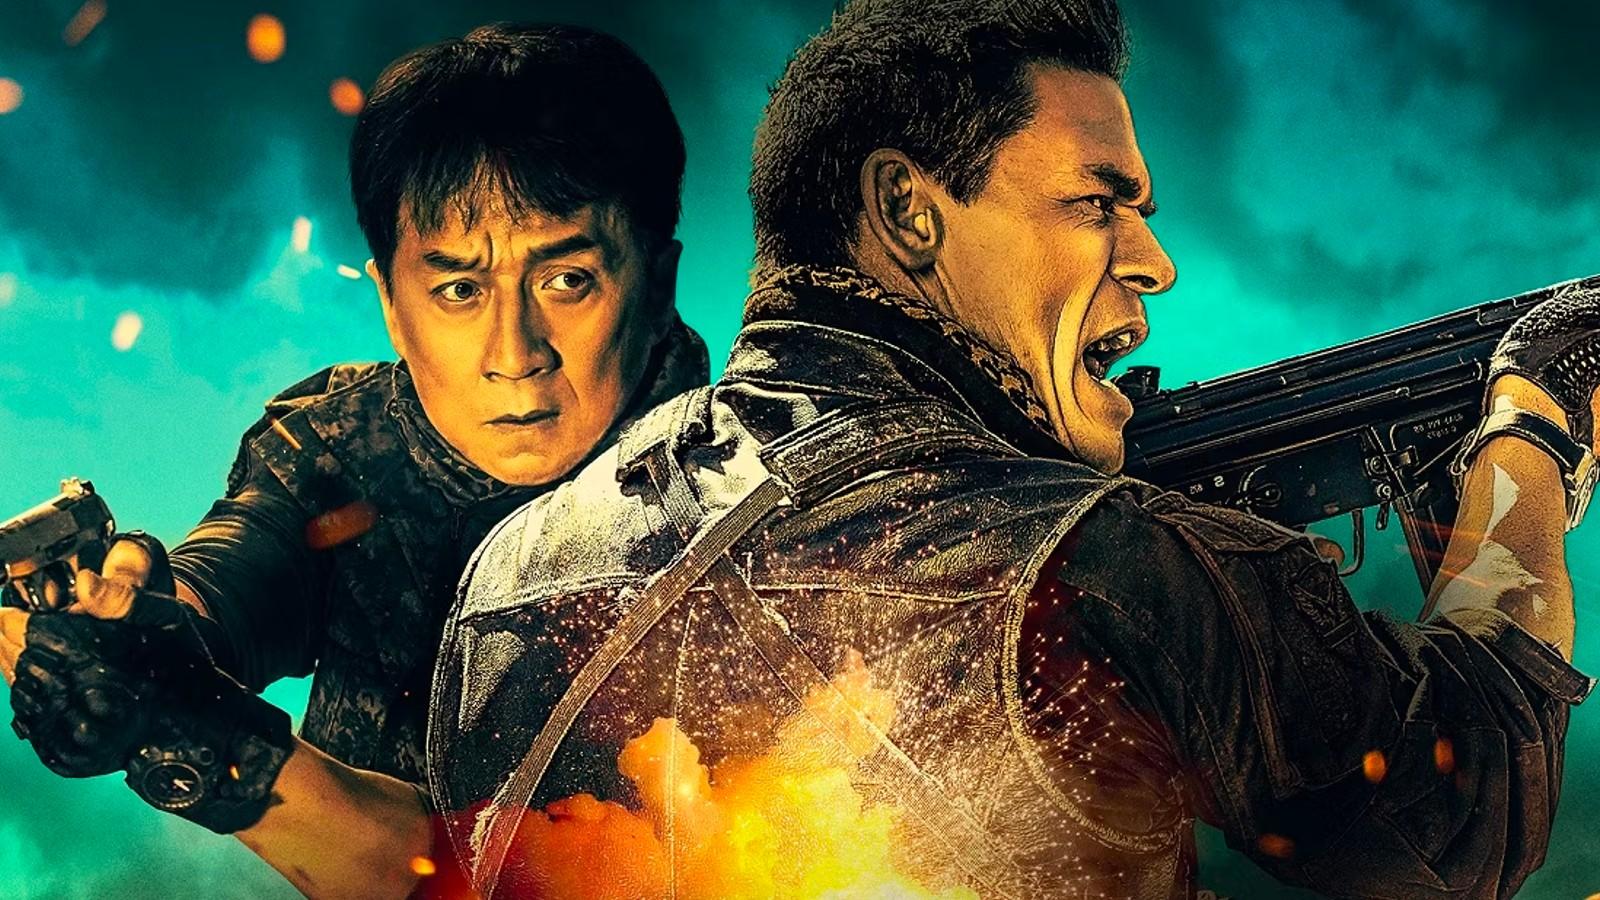 What is Hidden Strike about? New Jackie Chan movie explained - Dexerto